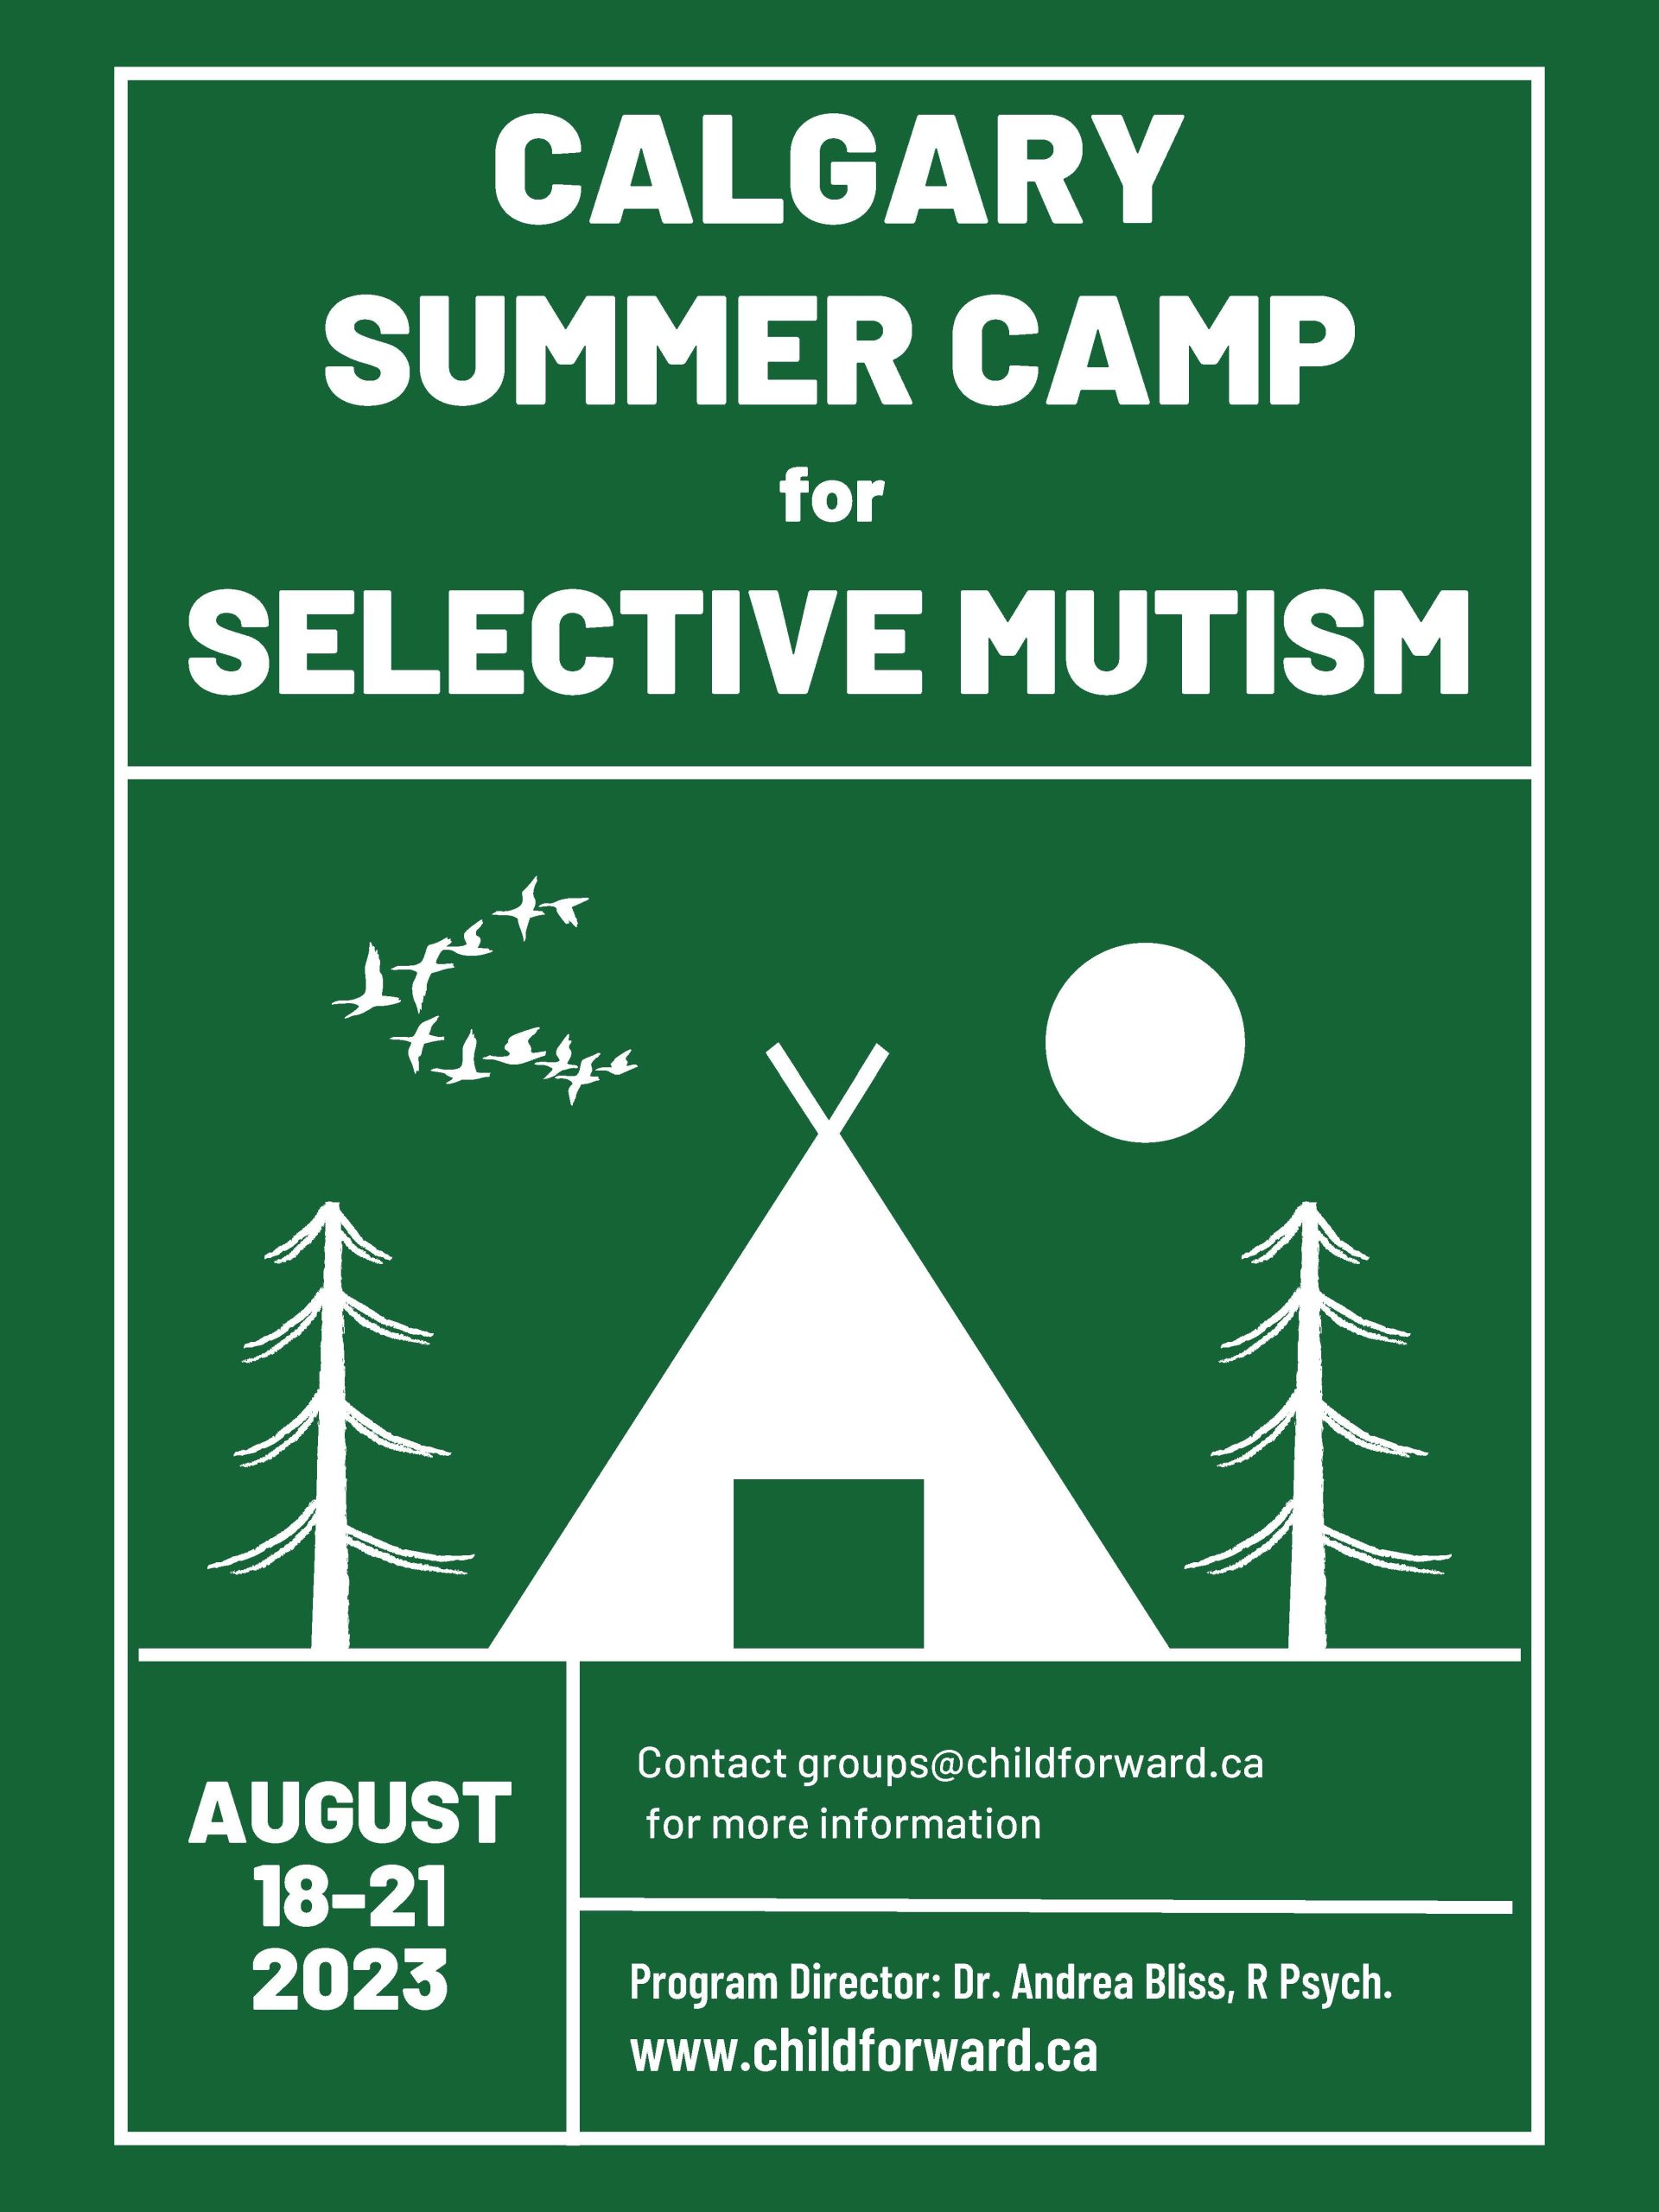 2023 Summer Camp for Selective Mutism